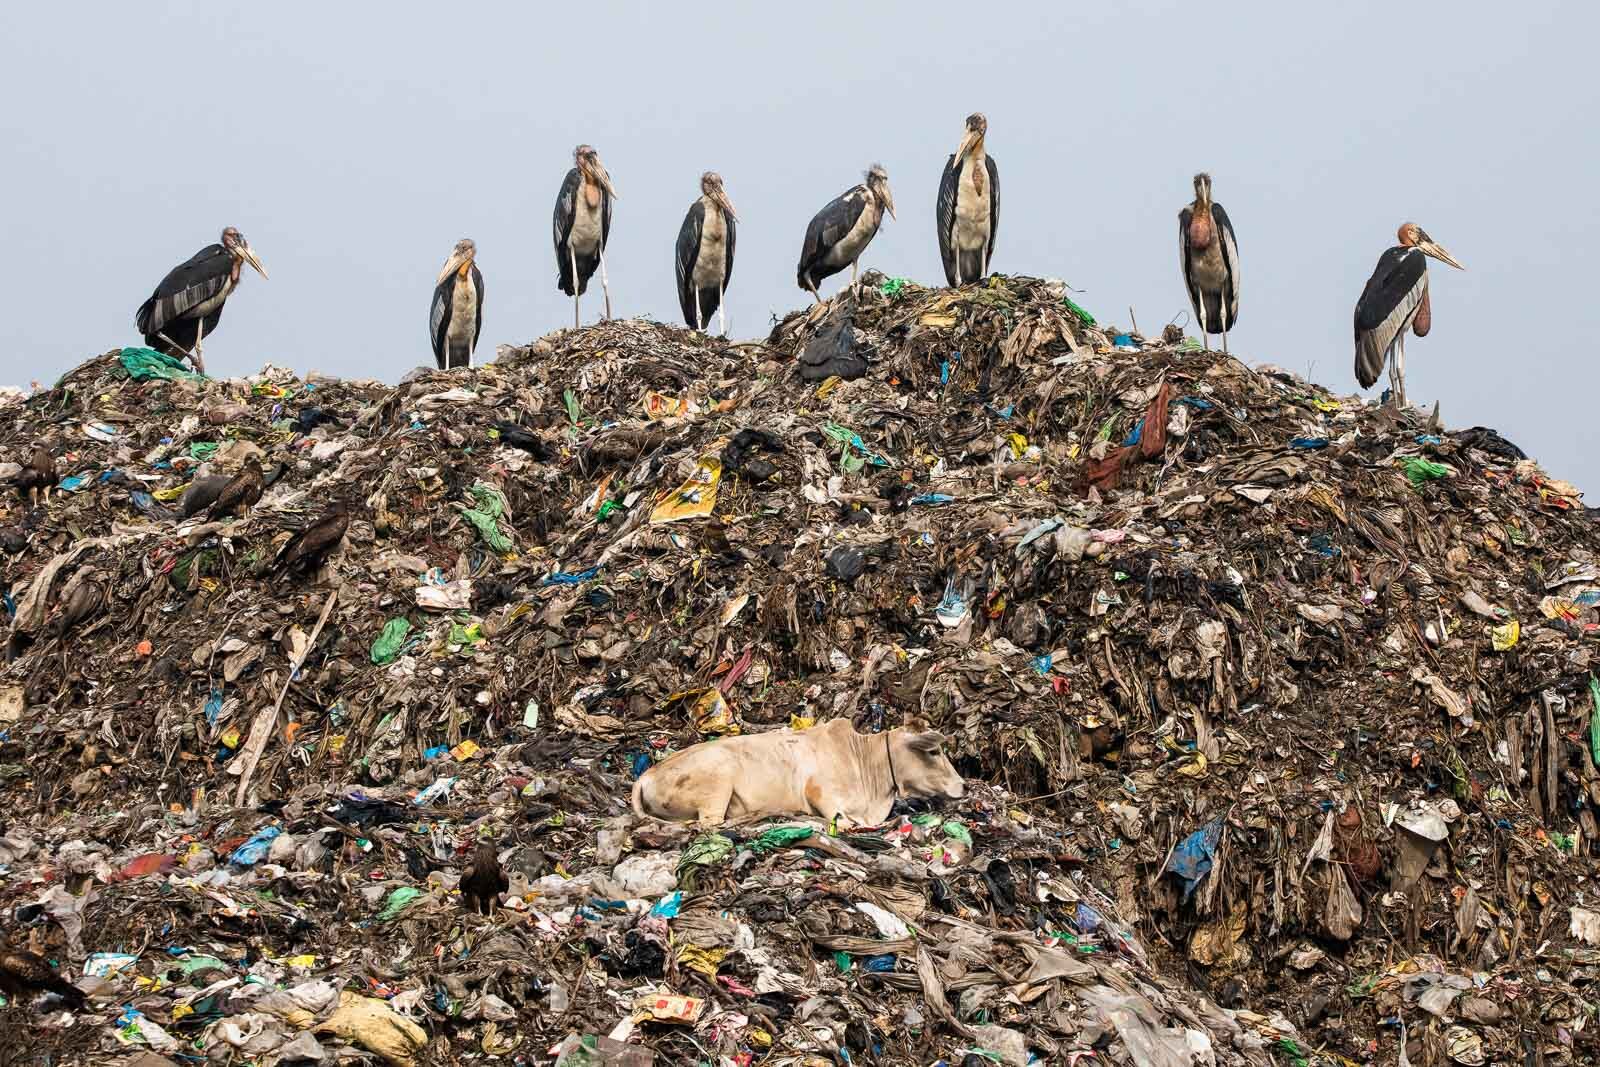 Endangered Greater Adjutant storks are pictured amongst the garbage in the Boragaon landfill located in Guwahati, Assam India. The landfill has the largest year-round concentration of Greater Adjutant storks in the world. Attracting a variety of scavenger species and encroaching upon Deepor Beel wetland, the landfill causes pollution, habitat destruction and wildlife deaths through toxic seepage. Once covering 4,000ha, the wetland has shrunk to an alarming 500ha. Out of the world’s 19 species of storks, the Greater Adjutant is the rarest and most endangered.The Zoological Society of London classified the bird as an EDGE species in 2014, meaning it is close to extinction. In 2016, the International Union for Conservation of Nature estimated only 800-1200 individuals were left, firmly cementing their status as endangered with a decreasing population.